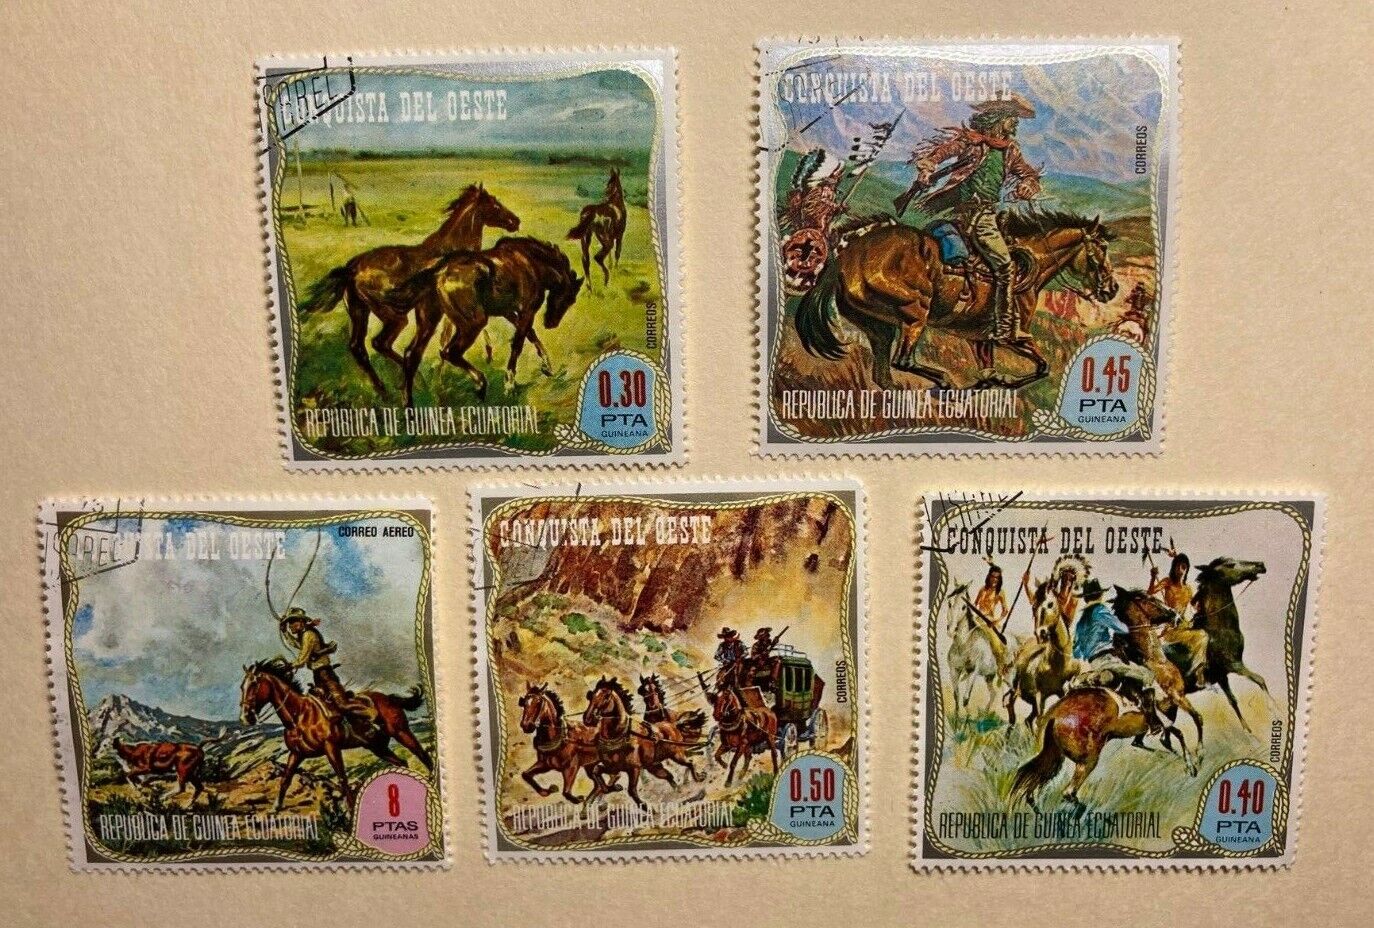 EQUATORIAL GUINEA Stamps: 1974 Conquista Del Oeste "Conquest of the West" Без бренда